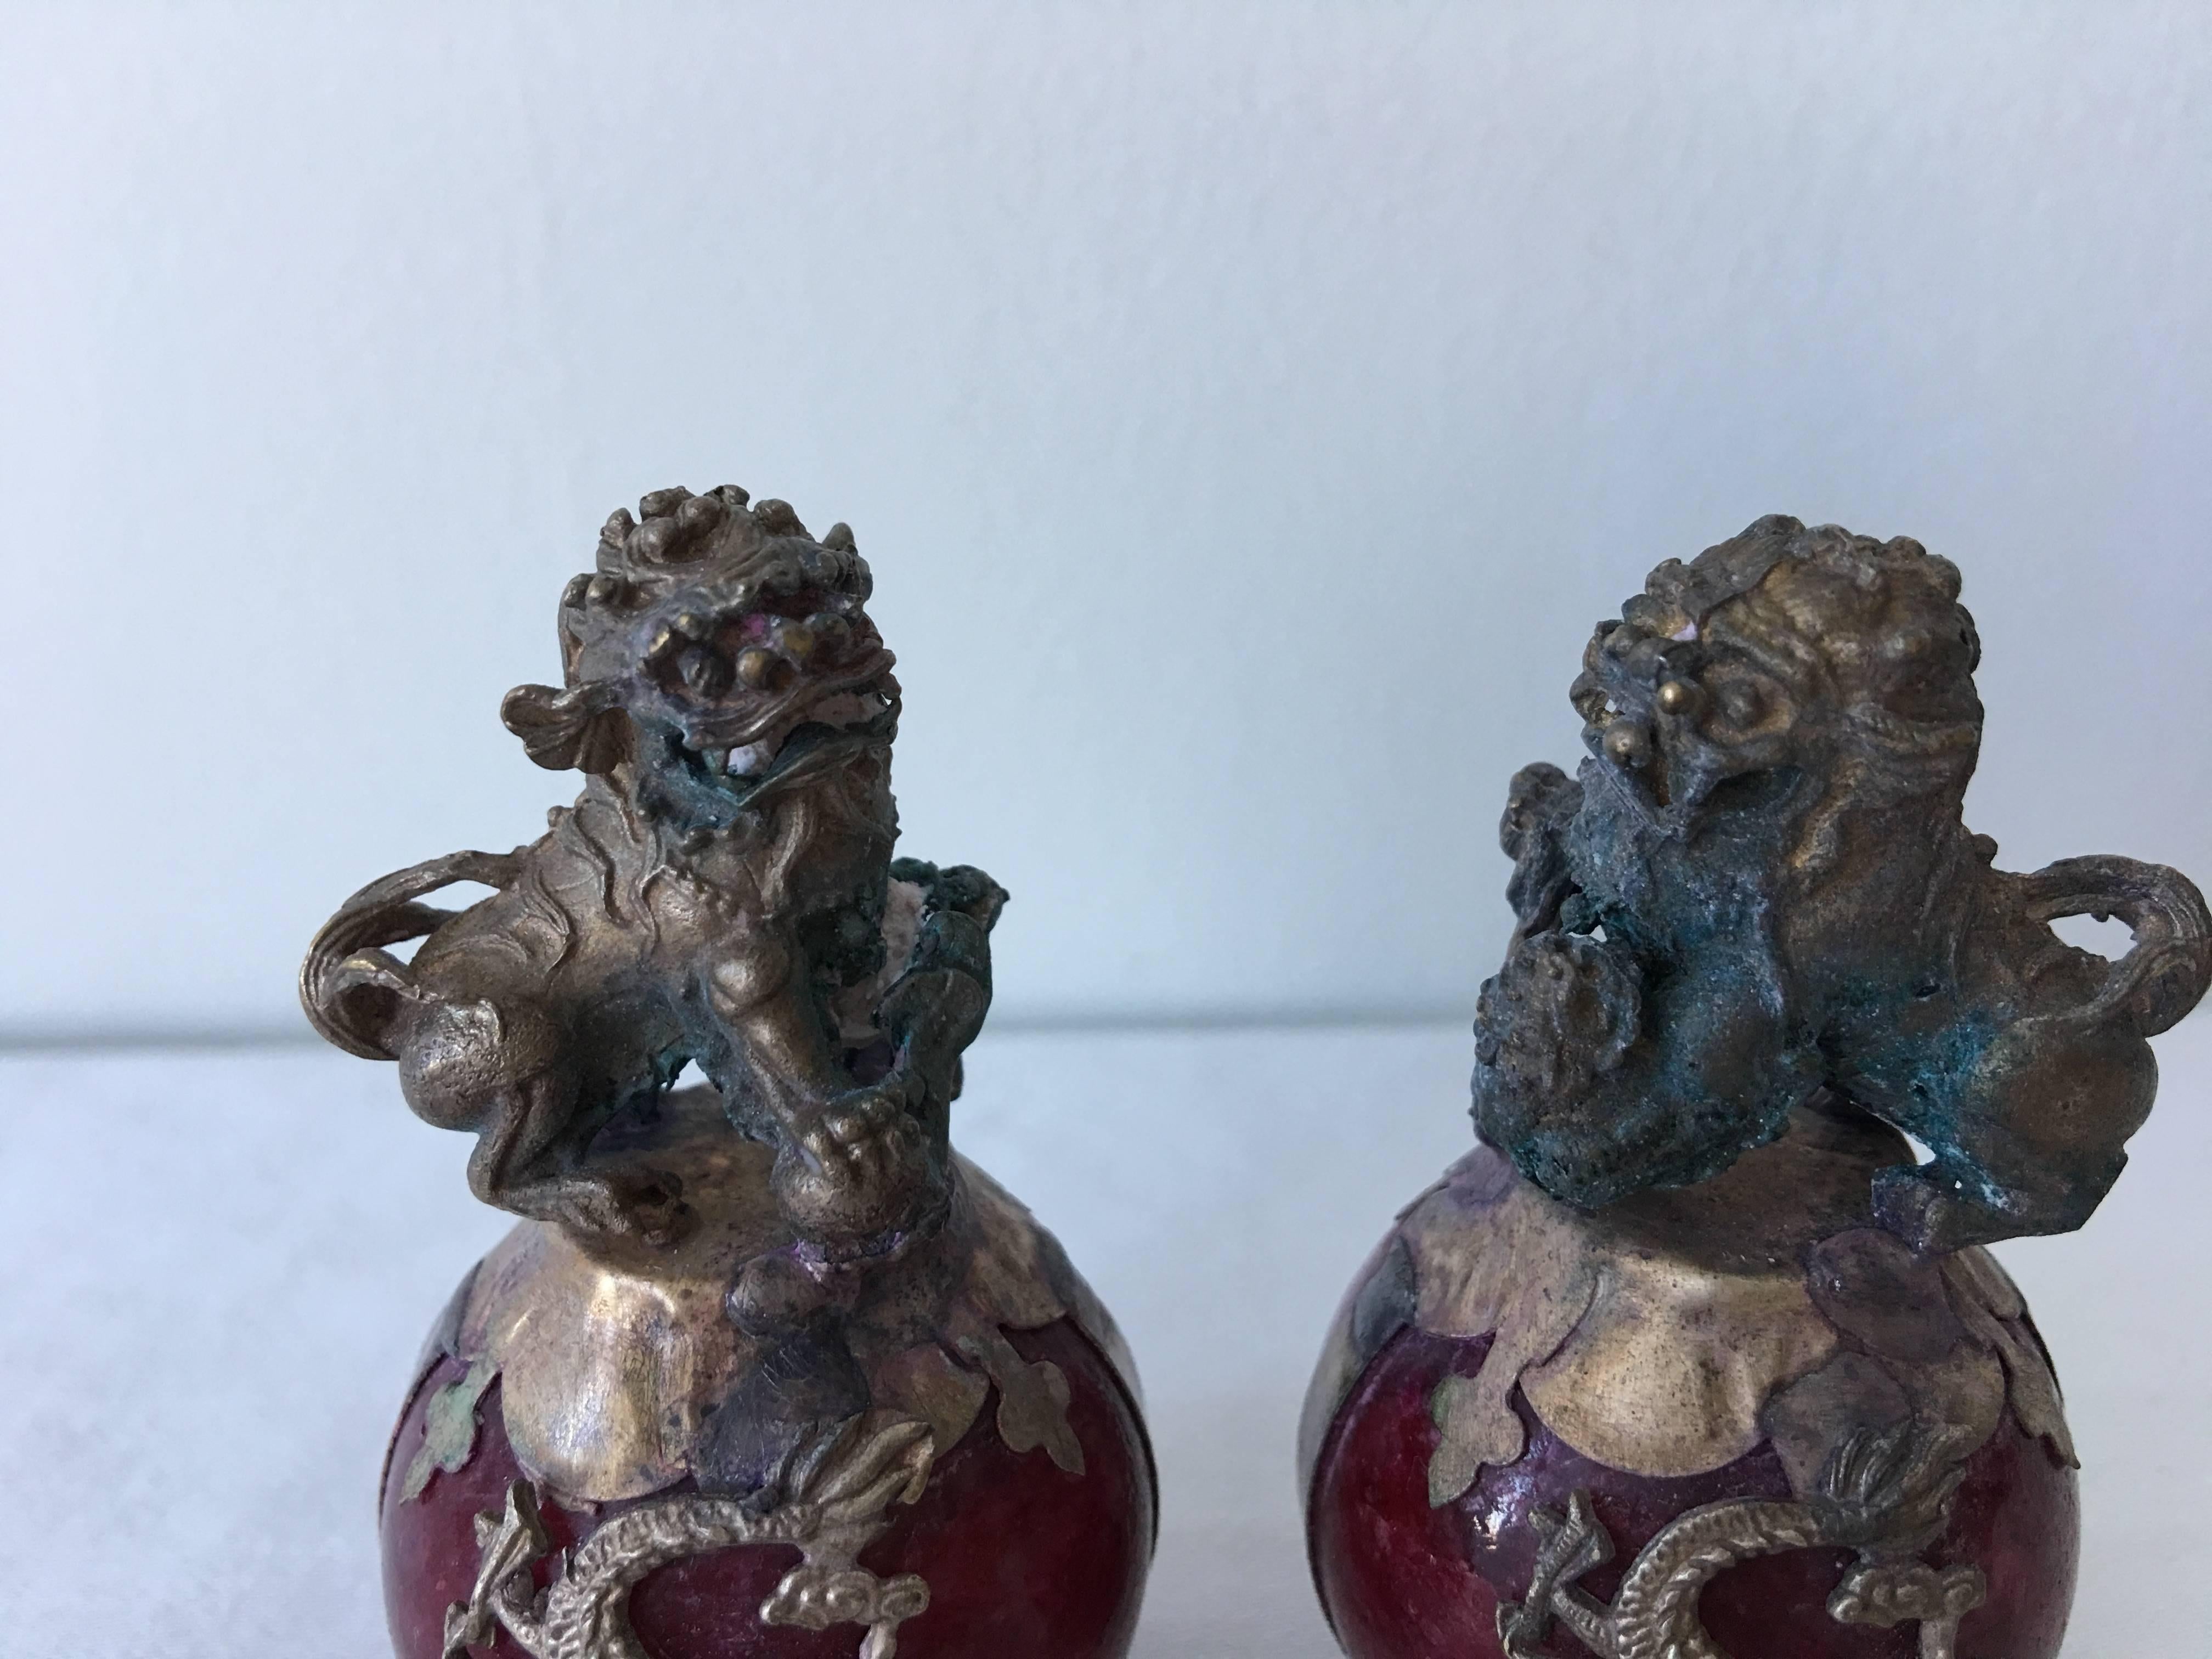 Offered is an immaculate pair of 19th century, miniature bronze foo dog statues. Each are rested upon a red stone orb with a dragon wrapping around it. Extremely rare, especially in such extraordinary condition.